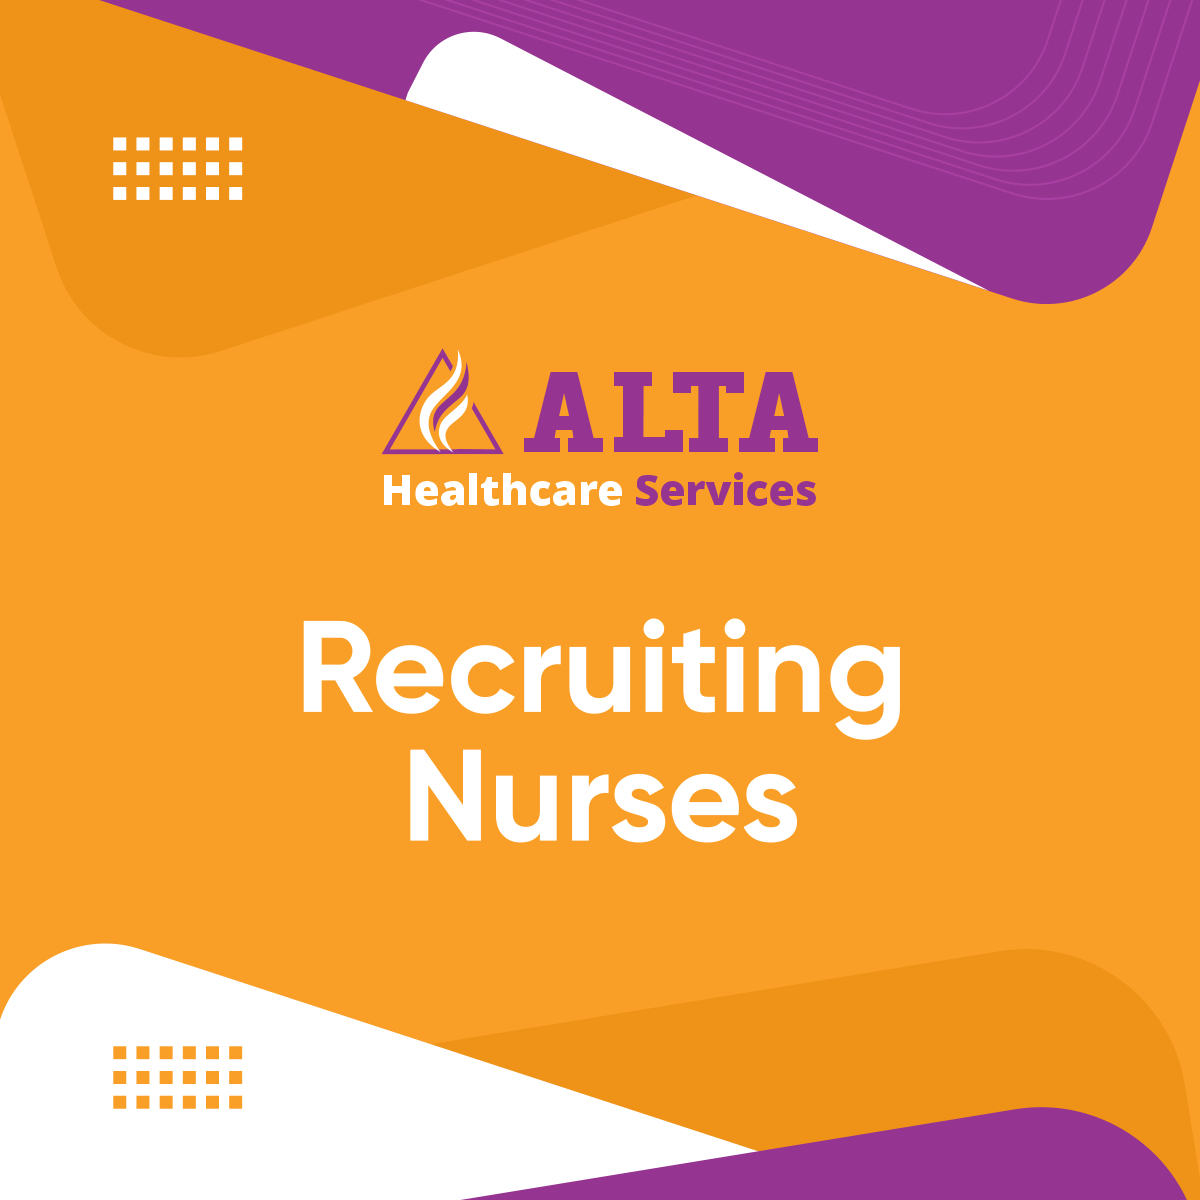 Nurses are vital workers in the healthcare workforce. A shortage of nurses in a facility affects the outcomes of patients’ health prognosis. We at ALTA Healthcare Services offer temporary and permanent placement for skilled nurses. 

#HealthcareStaff #HomeHealthCare